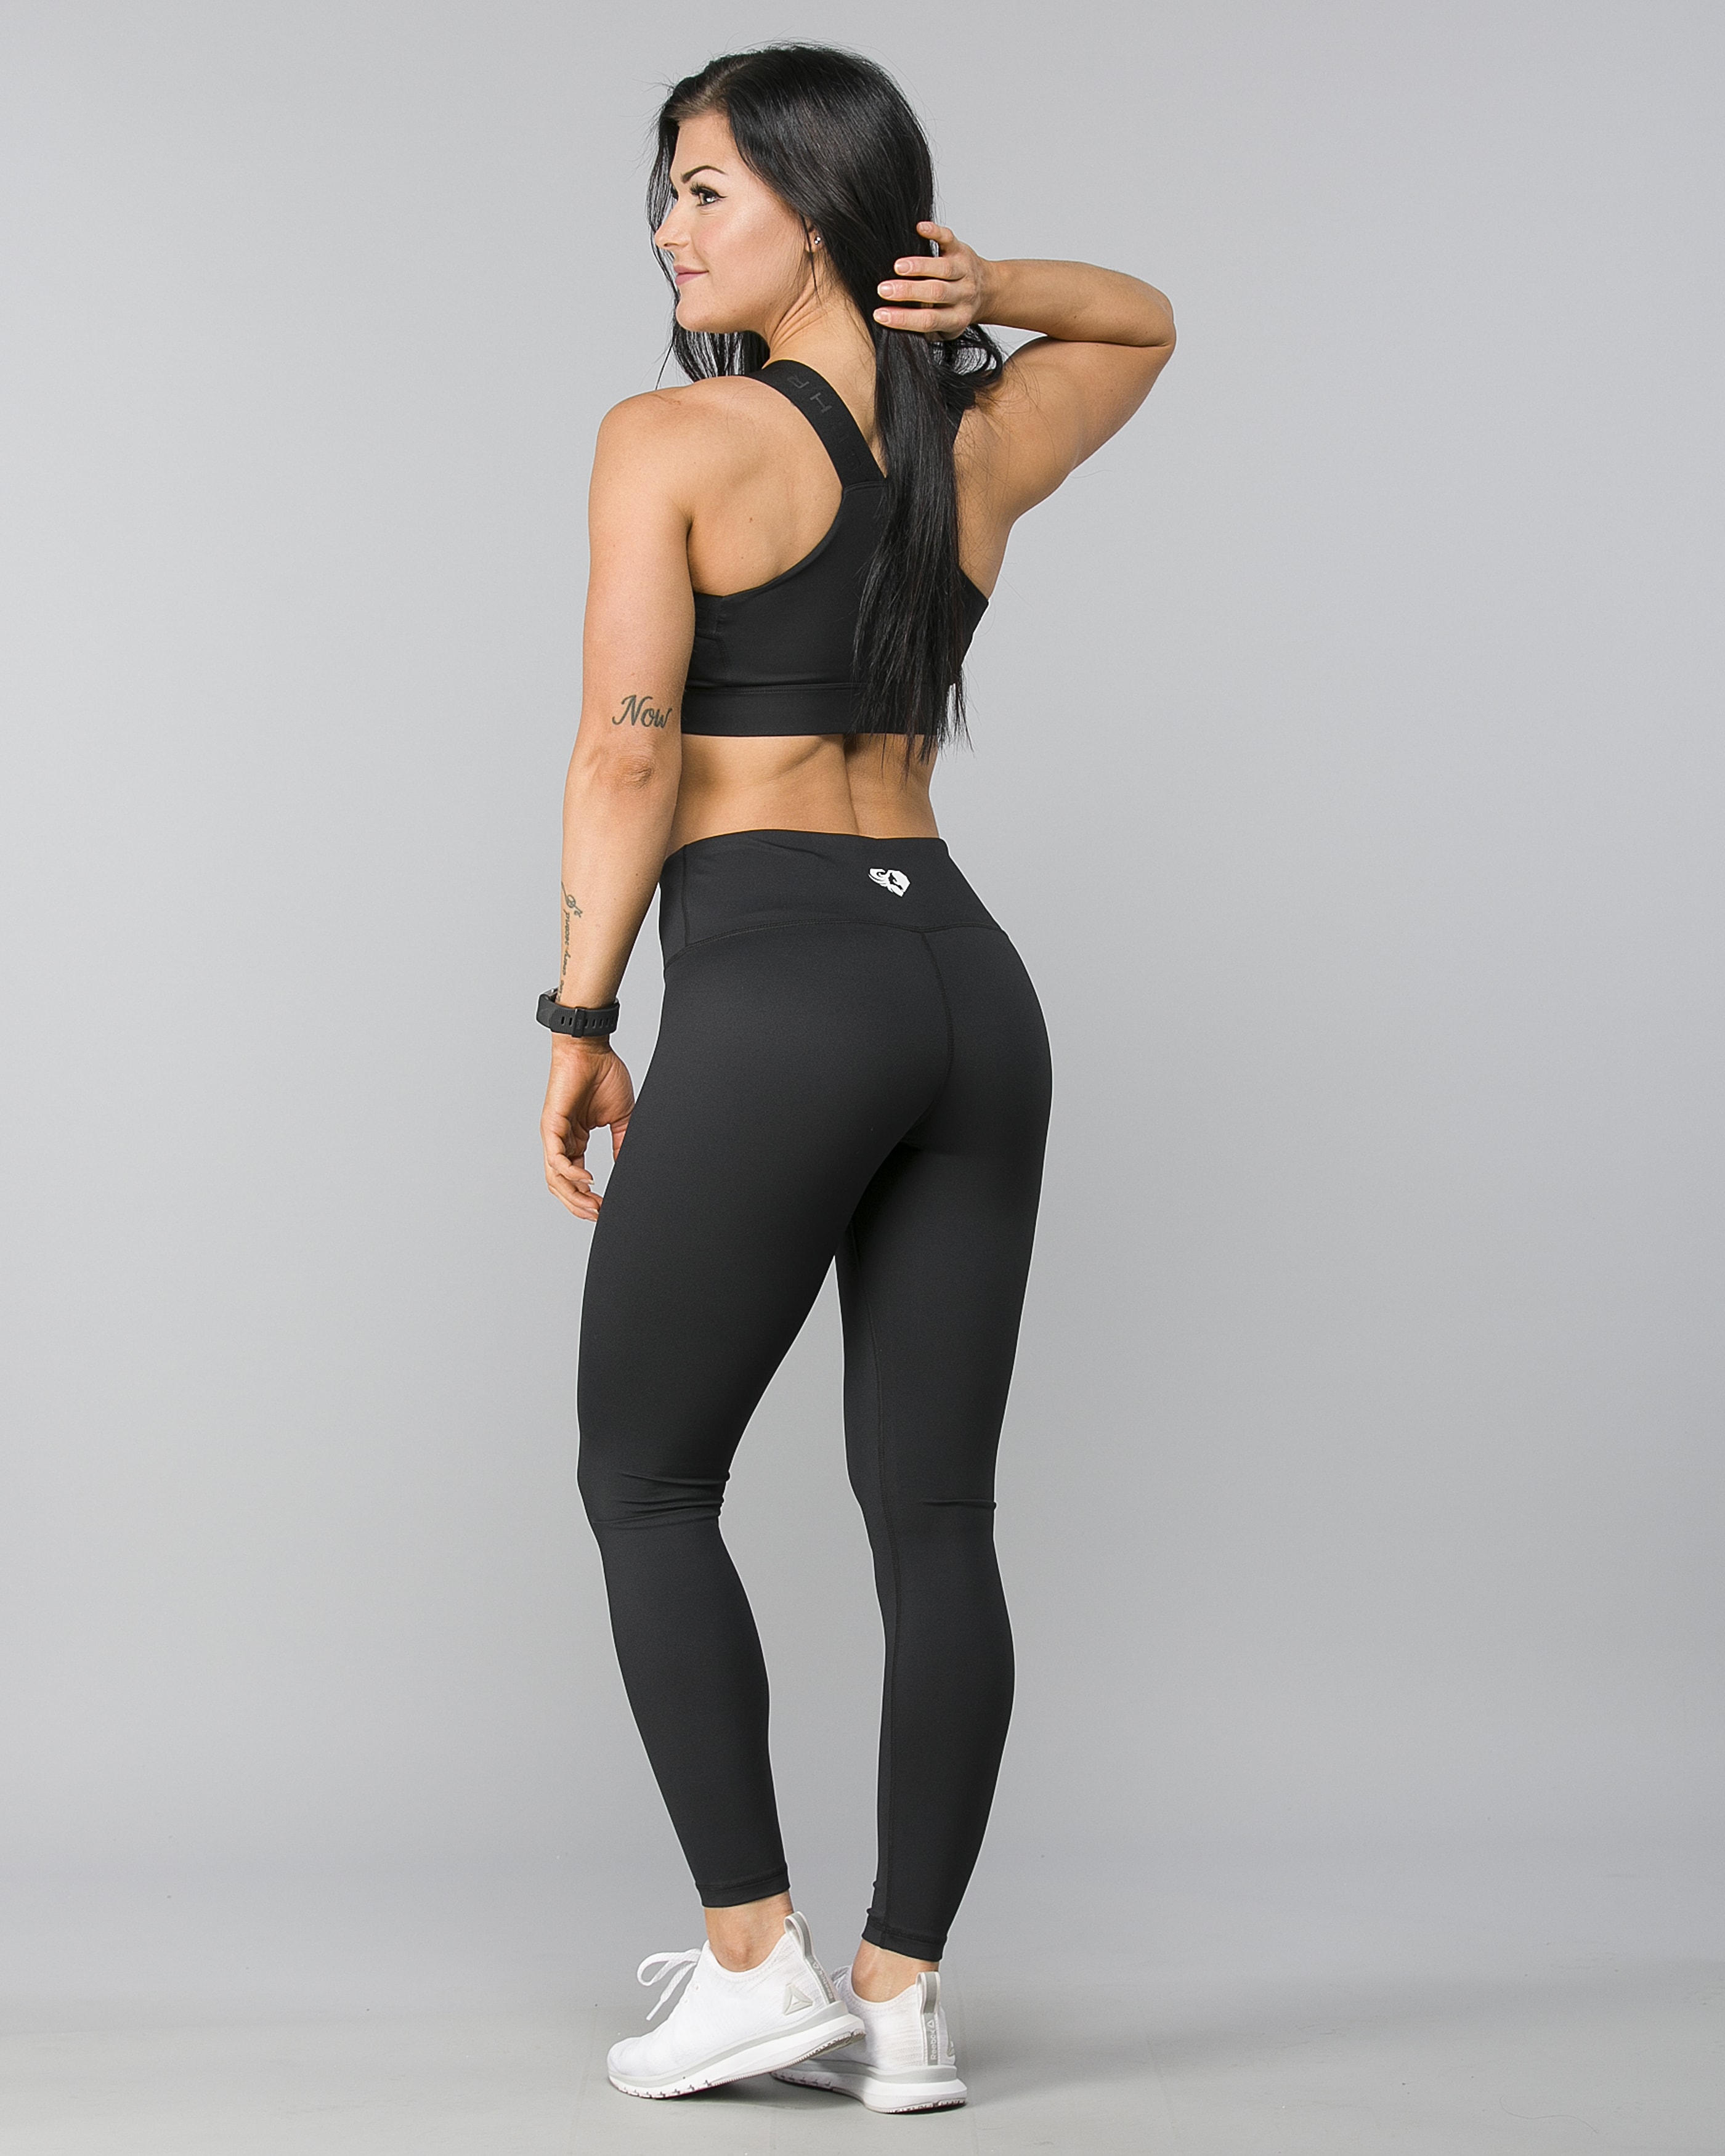 CTHH 2 Pack Leggings for Women Tummy Control-High Waist Non See